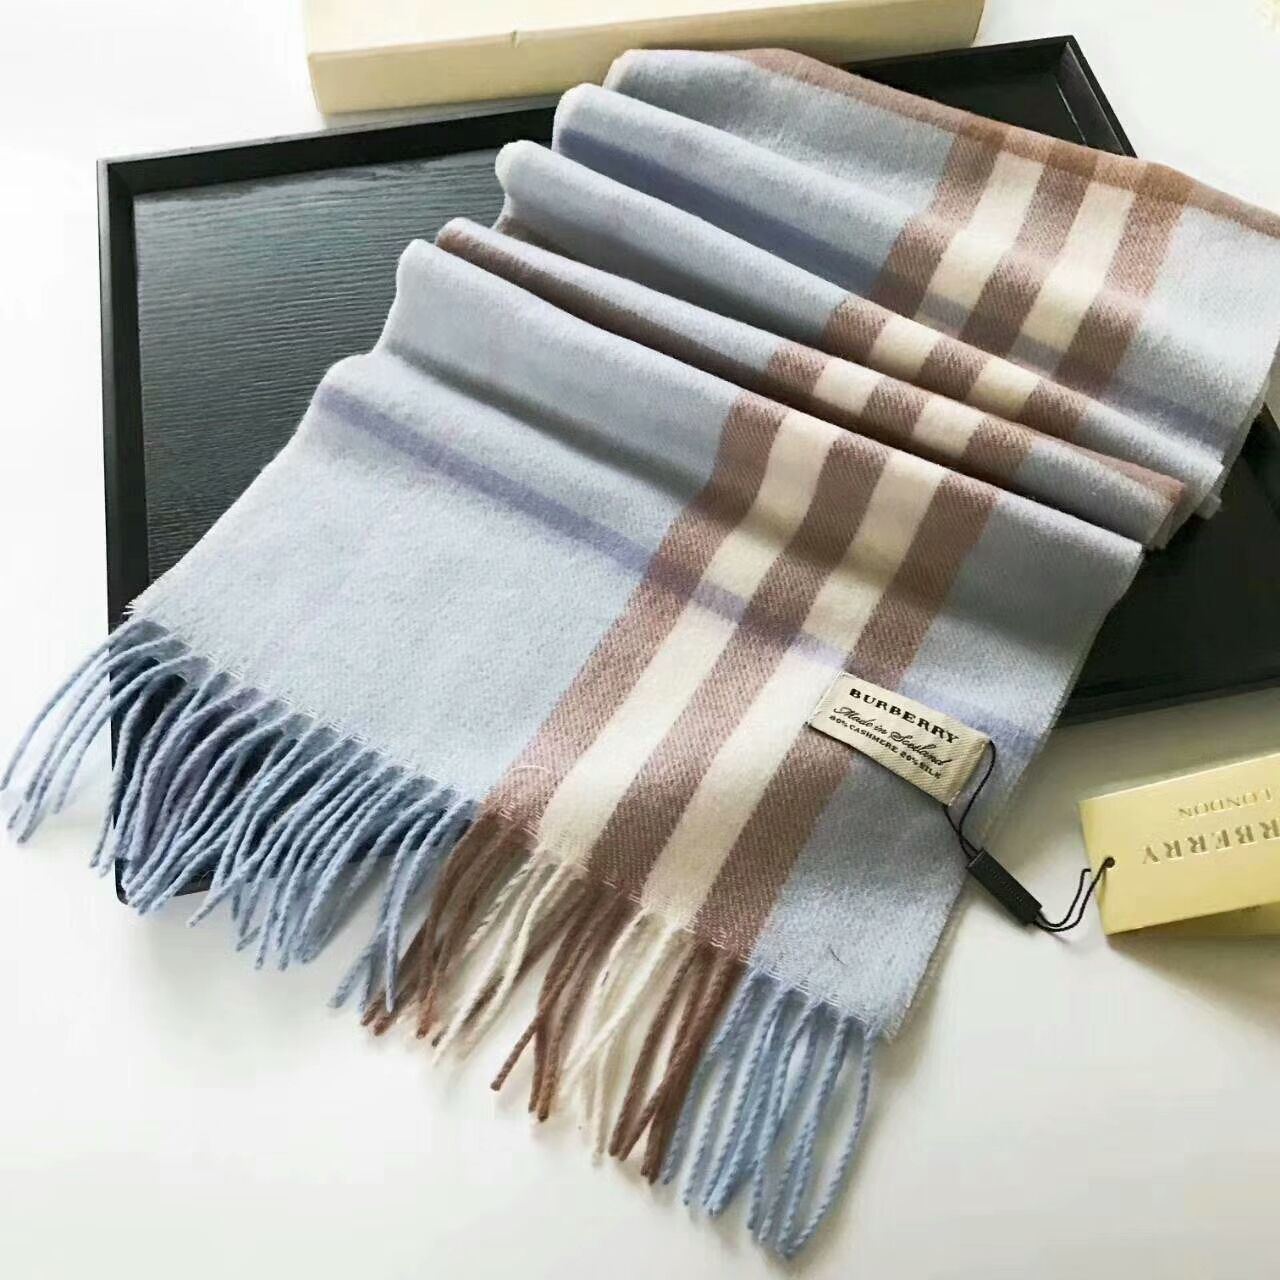 dhgate burberry scarf